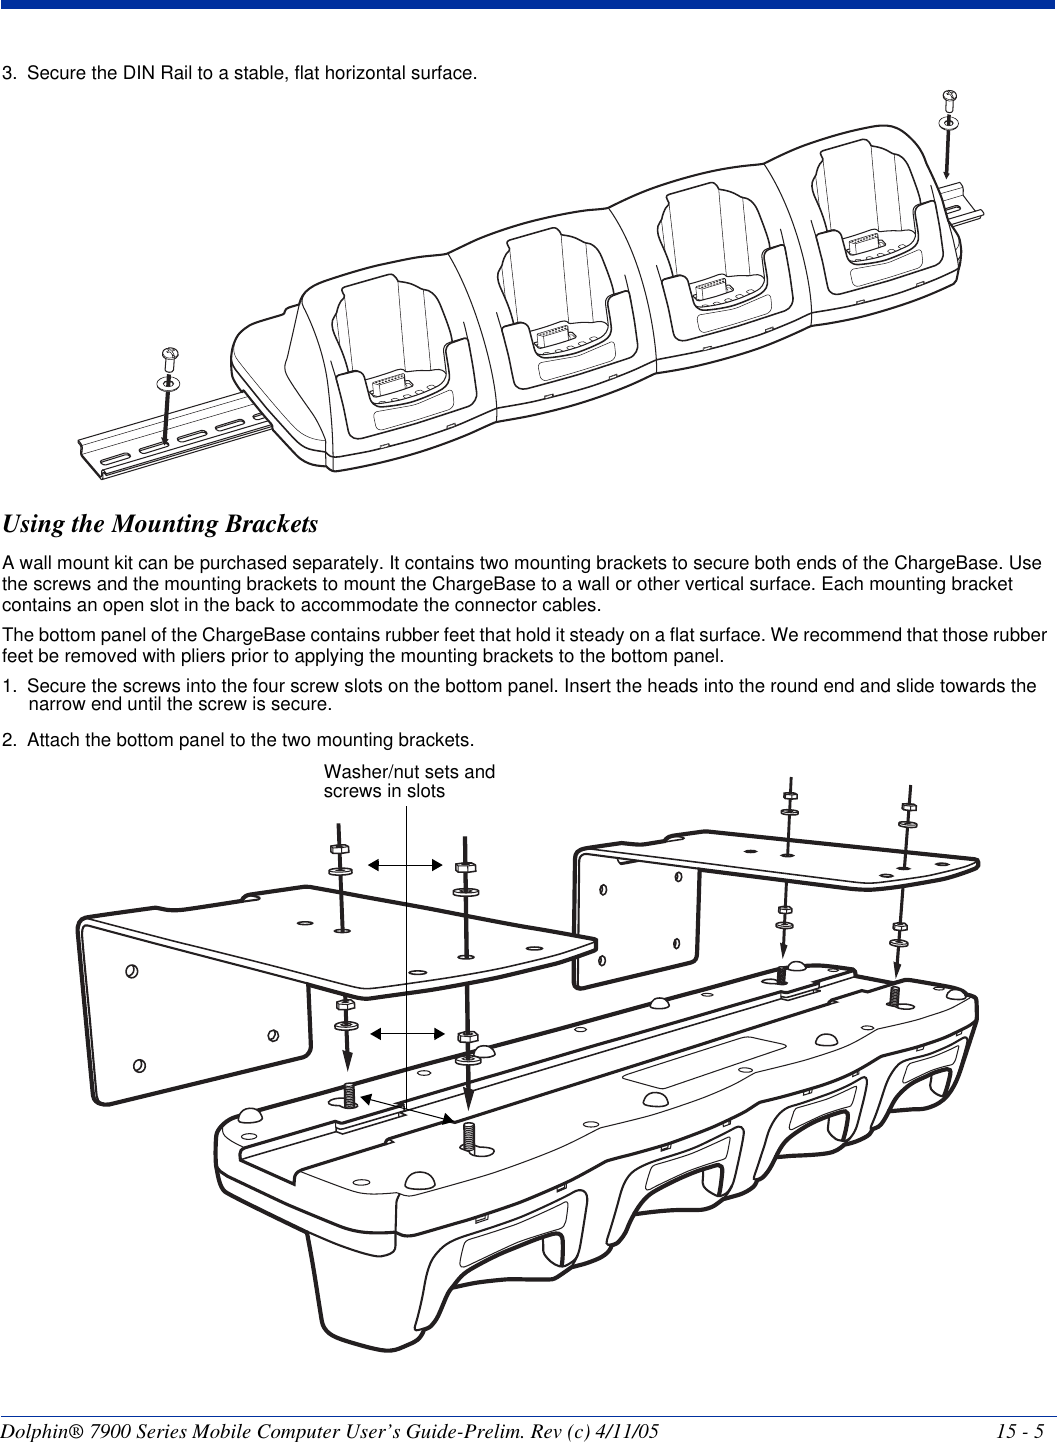 Dolphin® 7900 Series Mobile Computer User’s Guide-Prelim. Rev (c) 4/11/05 15 - 53. Secure the DIN Rail to a stable, flat horizontal surface. Using the Mounting BracketsA wall mount kit can be purchased separately. It contains two mounting brackets to secure both ends of the ChargeBase. Use the screws and the mounting brackets to mount the ChargeBase to a wall or other vertical surface. Each mounting bracket contains an open slot in the back to accommodate the connector cables.The bottom panel of the ChargeBase contains rubber feet that hold it steady on a flat surface. We recommend that those rubber feet be removed with pliers prior to applying the mounting brackets to the bottom panel. 1. Secure the screws into the four screw slots on the bottom panel. Insert the heads into the round end and slide towards the narrow end until the screw is secure.2. Attach the bottom panel to the two mounting brackets.Washer/nut sets and screws in slots